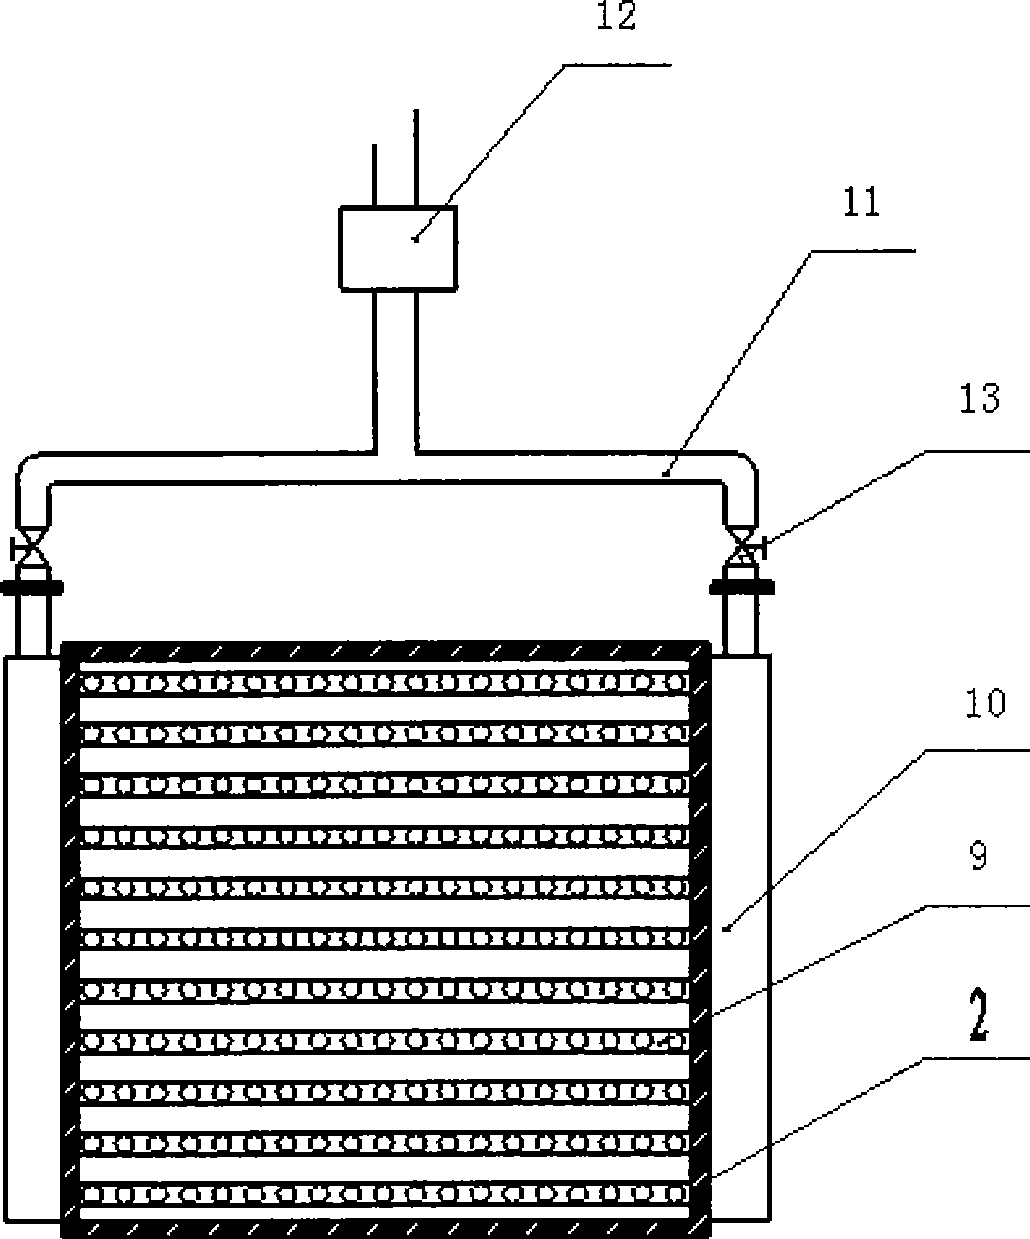 Integrated device for hydraulic classification and sorting of coarse slime as well as classification and sorting system